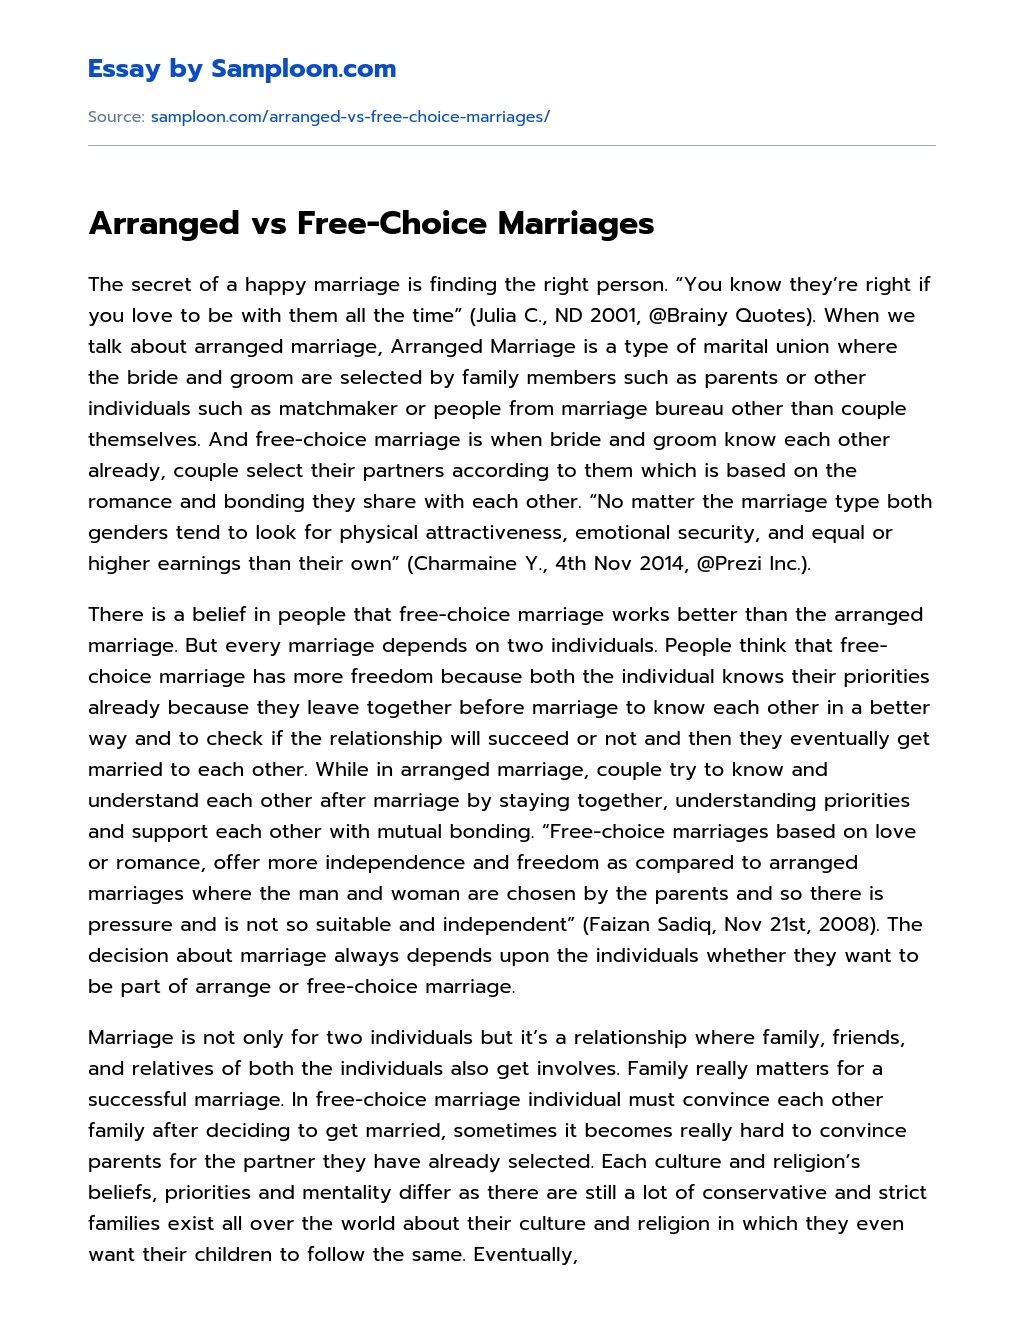 Arranged vs Free-Choice Marriages essay